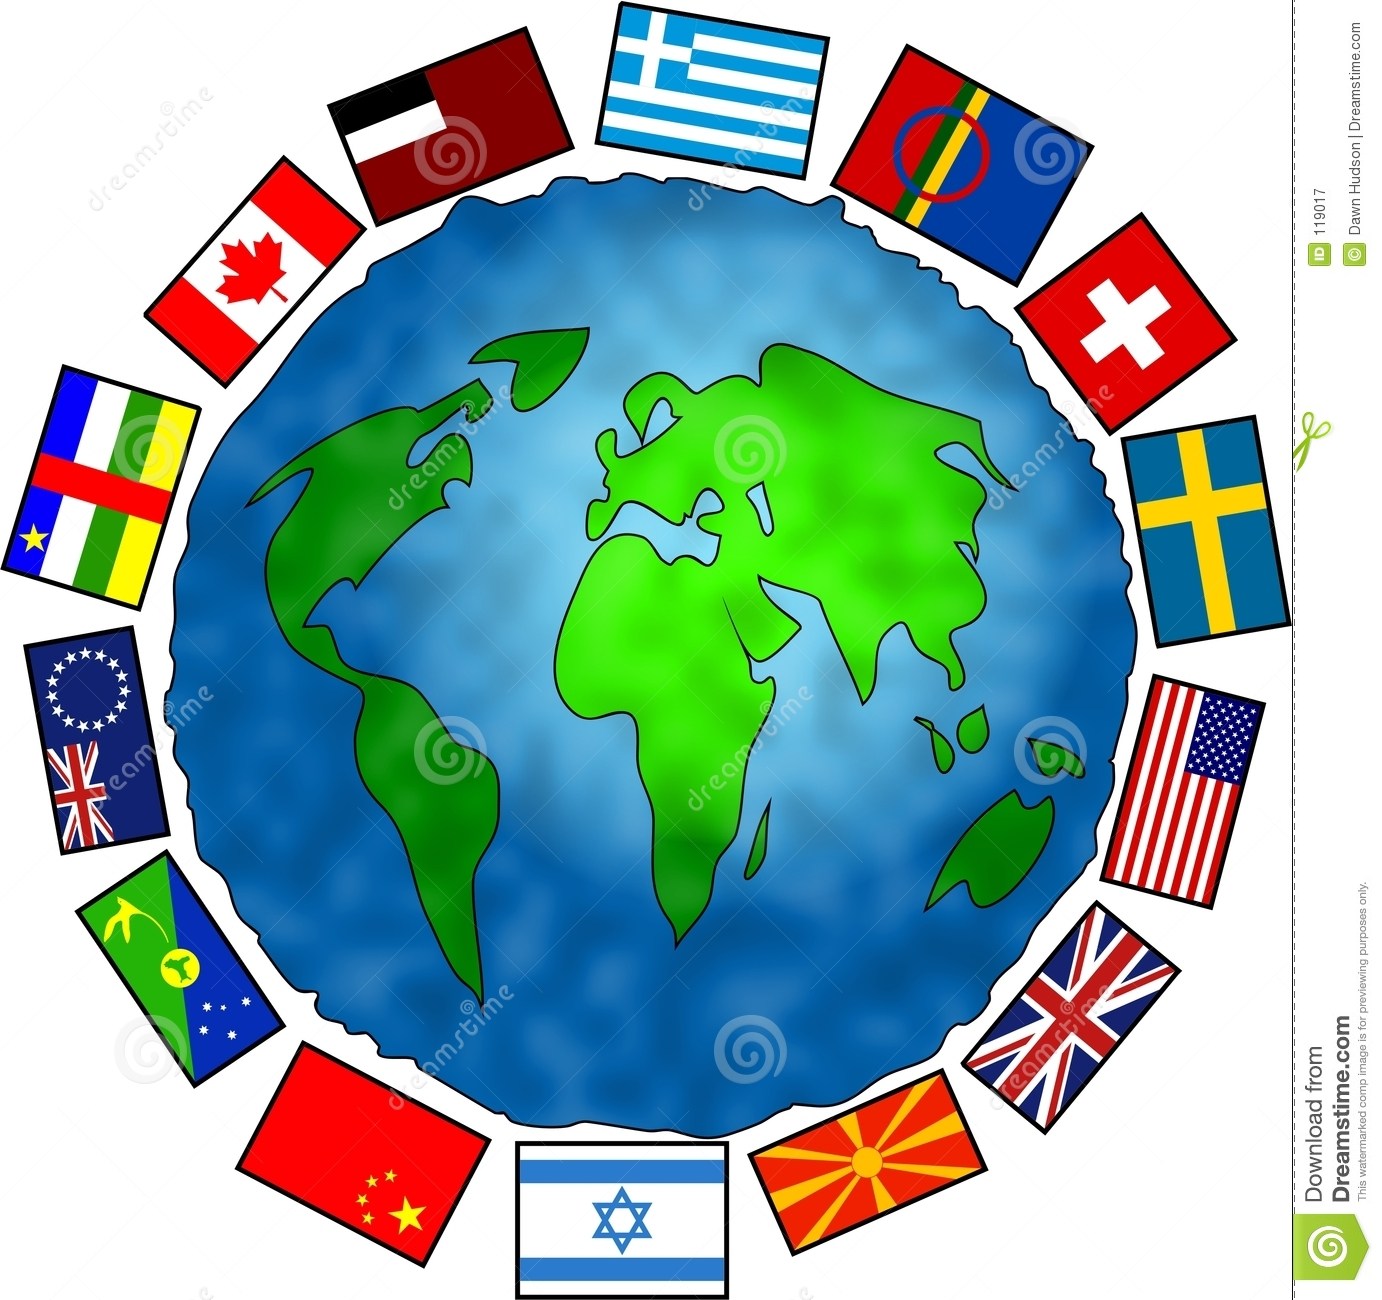 Free flags of the world clipart 7 » Clipart Portal.